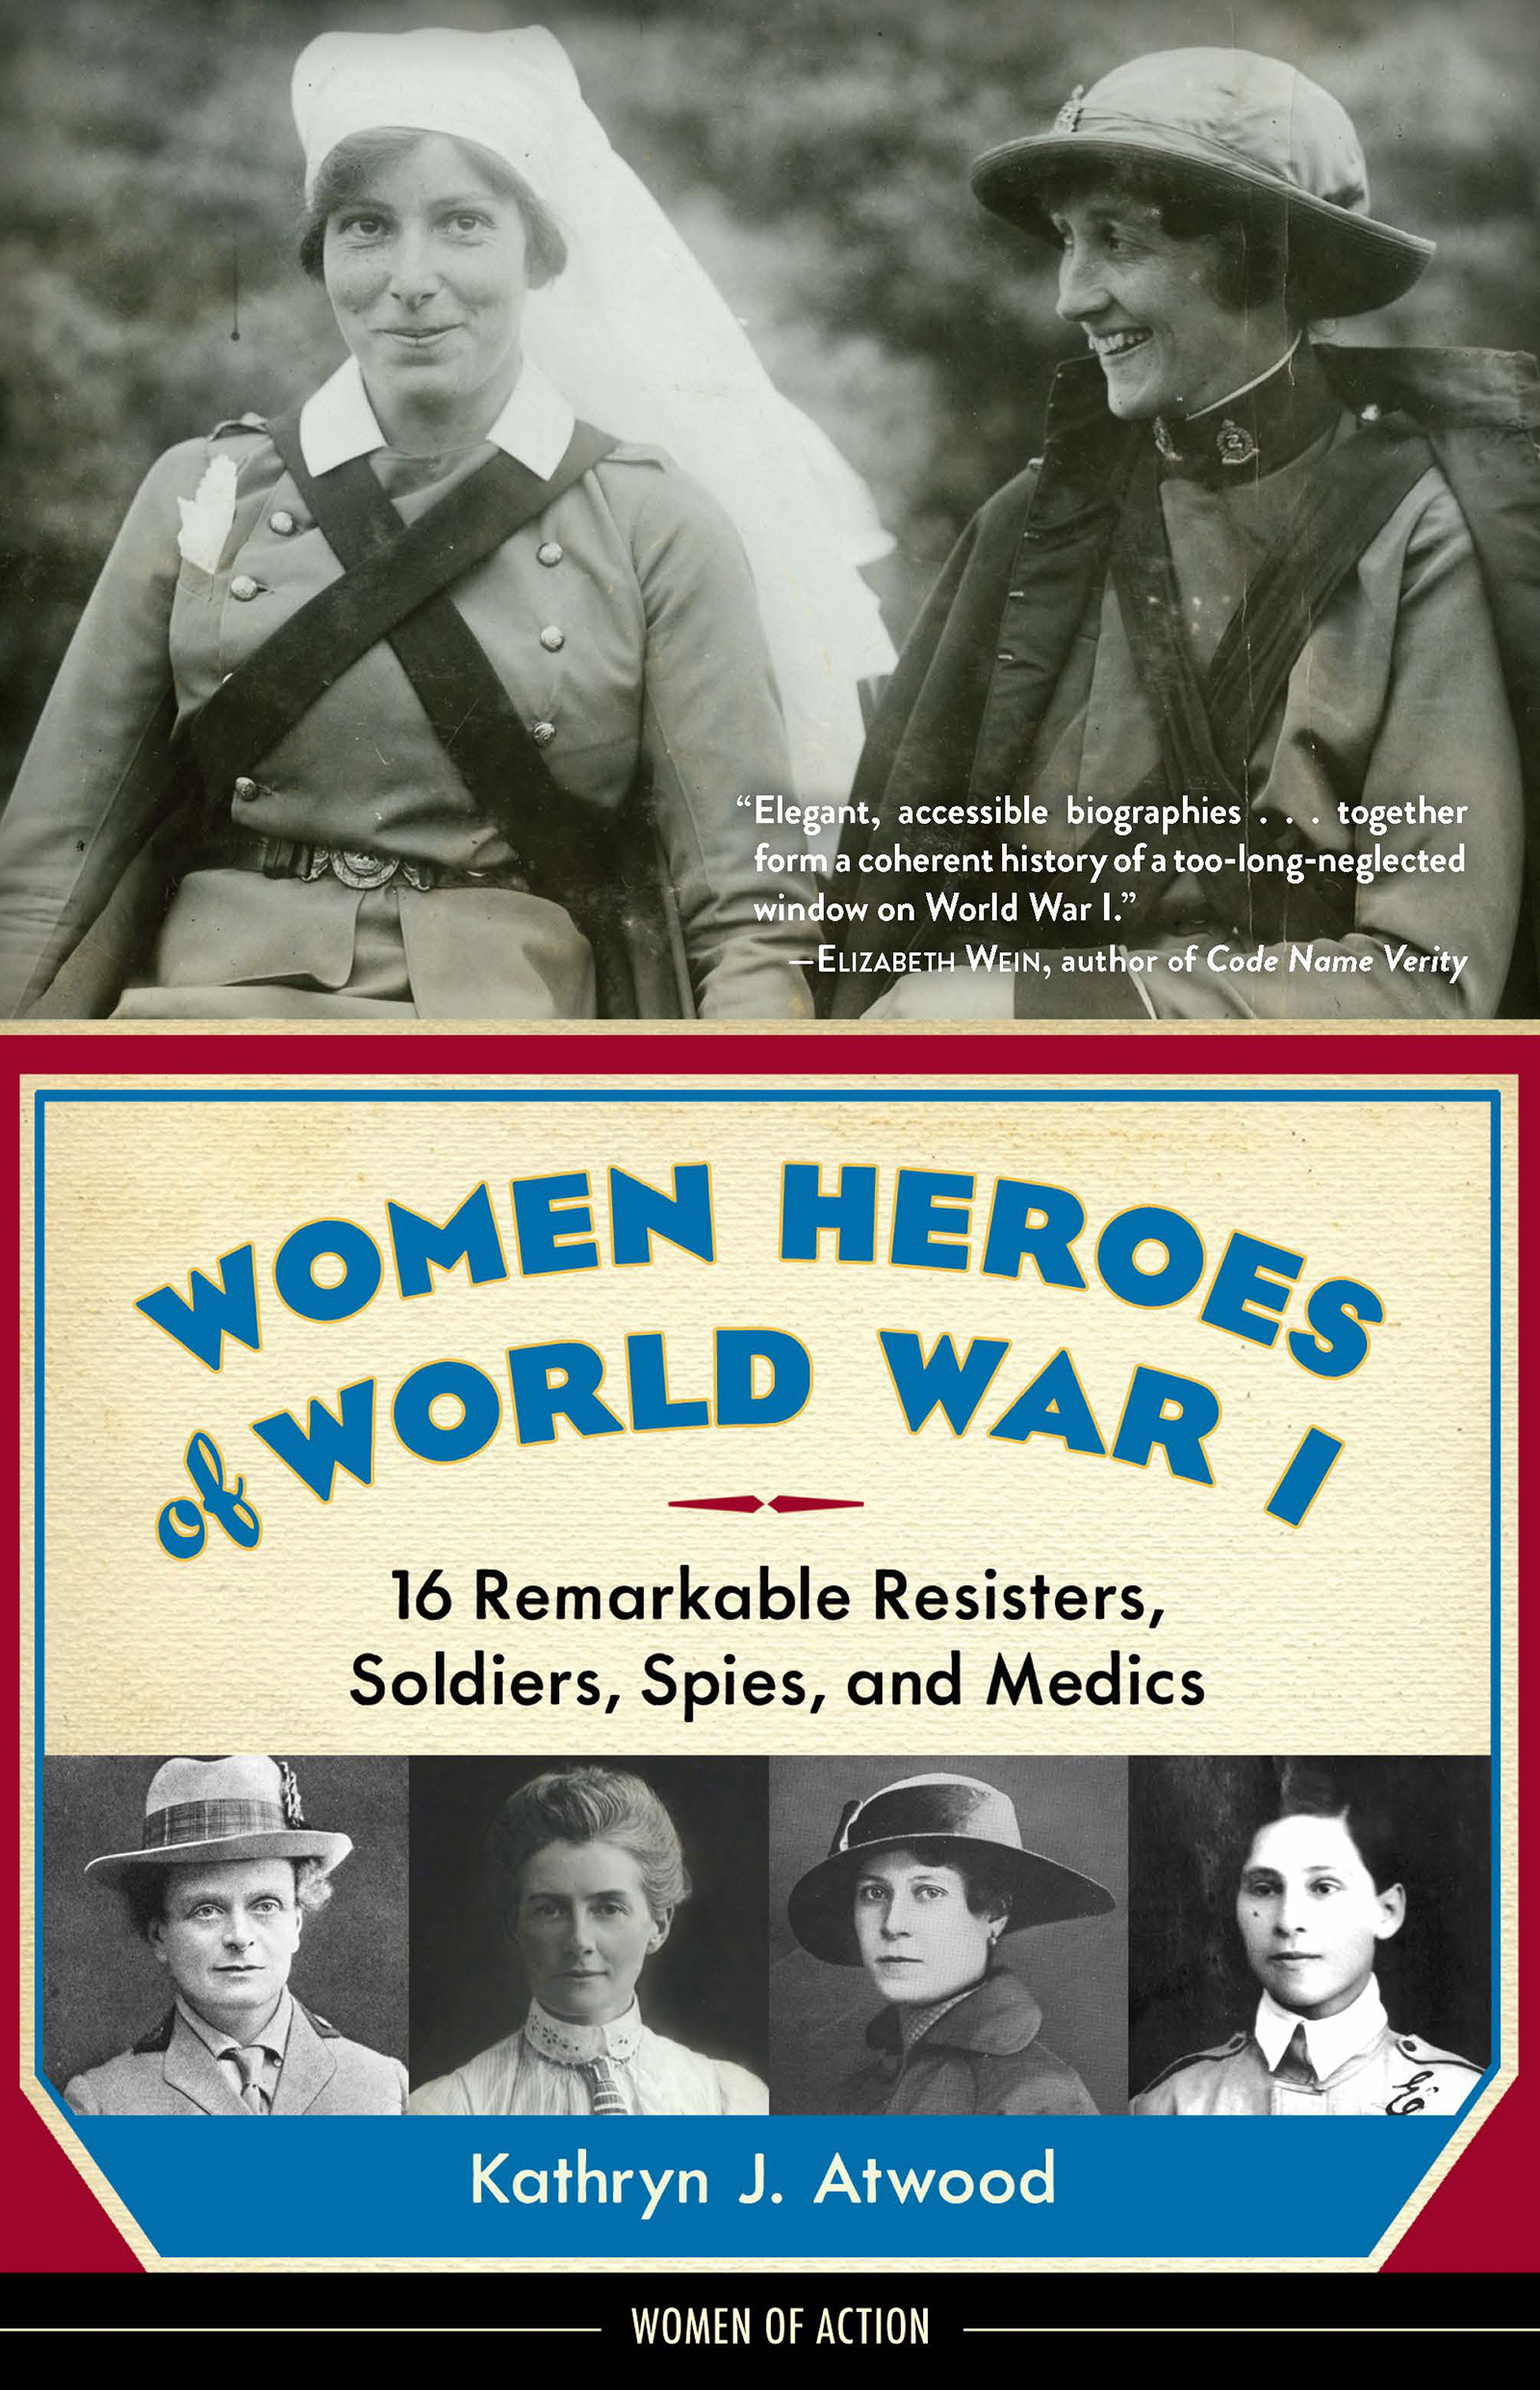 Image de couverture de Women Heroes of World War I [electronic resource] : 16 Remarkable Resisters, Soldiers, Spies, and Medics